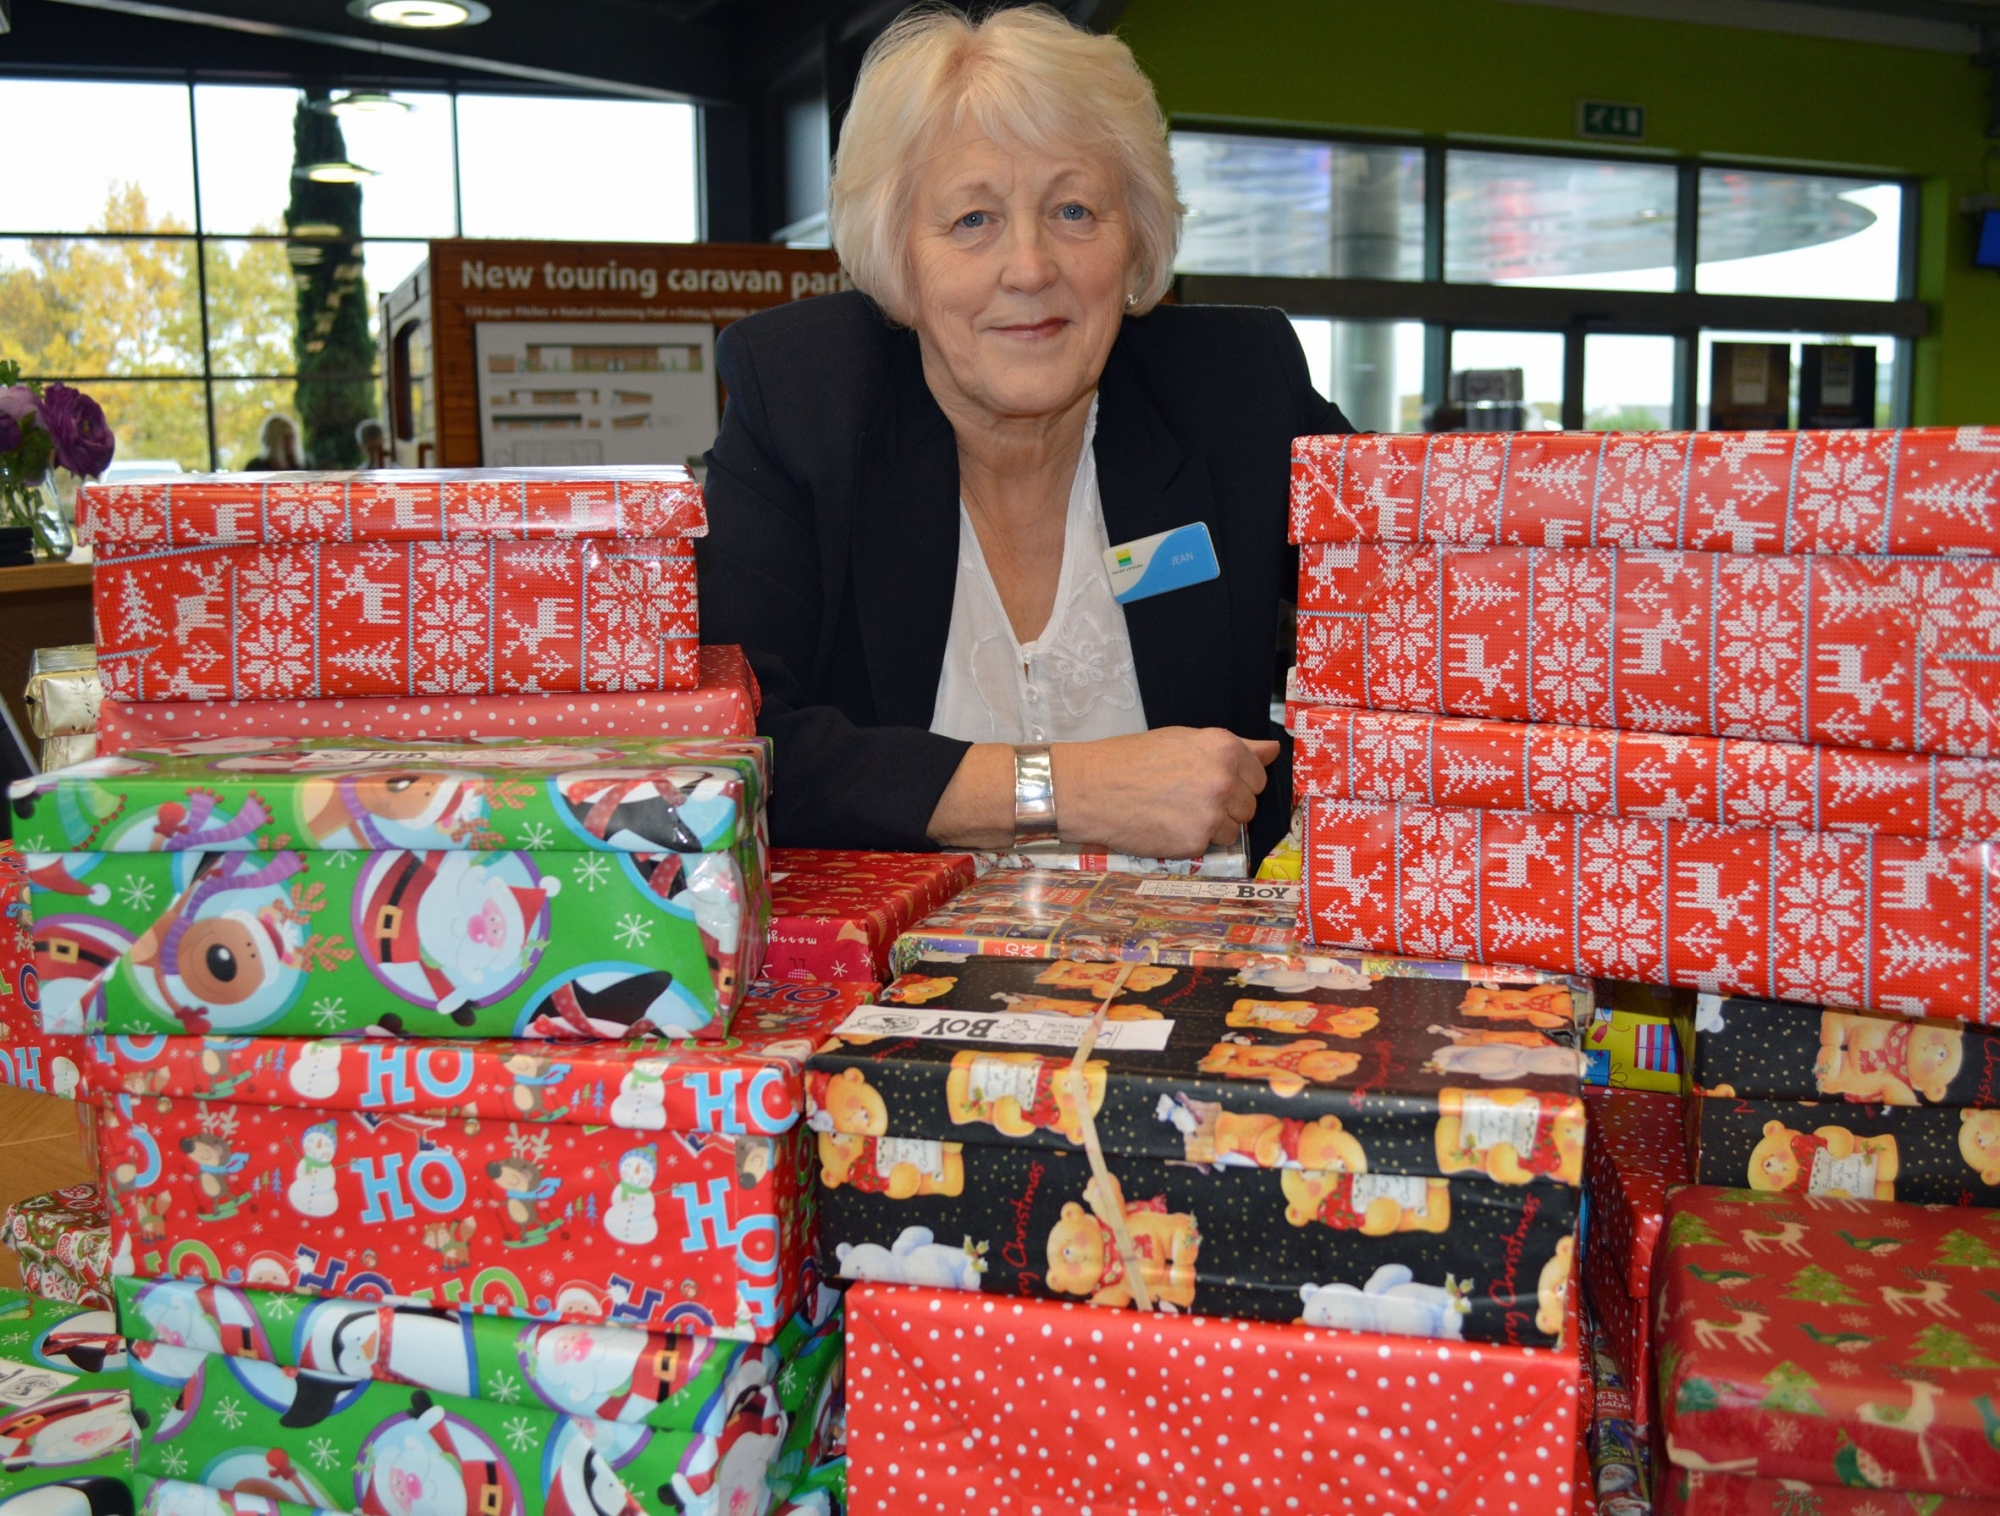 Salop Leisure receptionist collect 'Love in a box' for Christmas